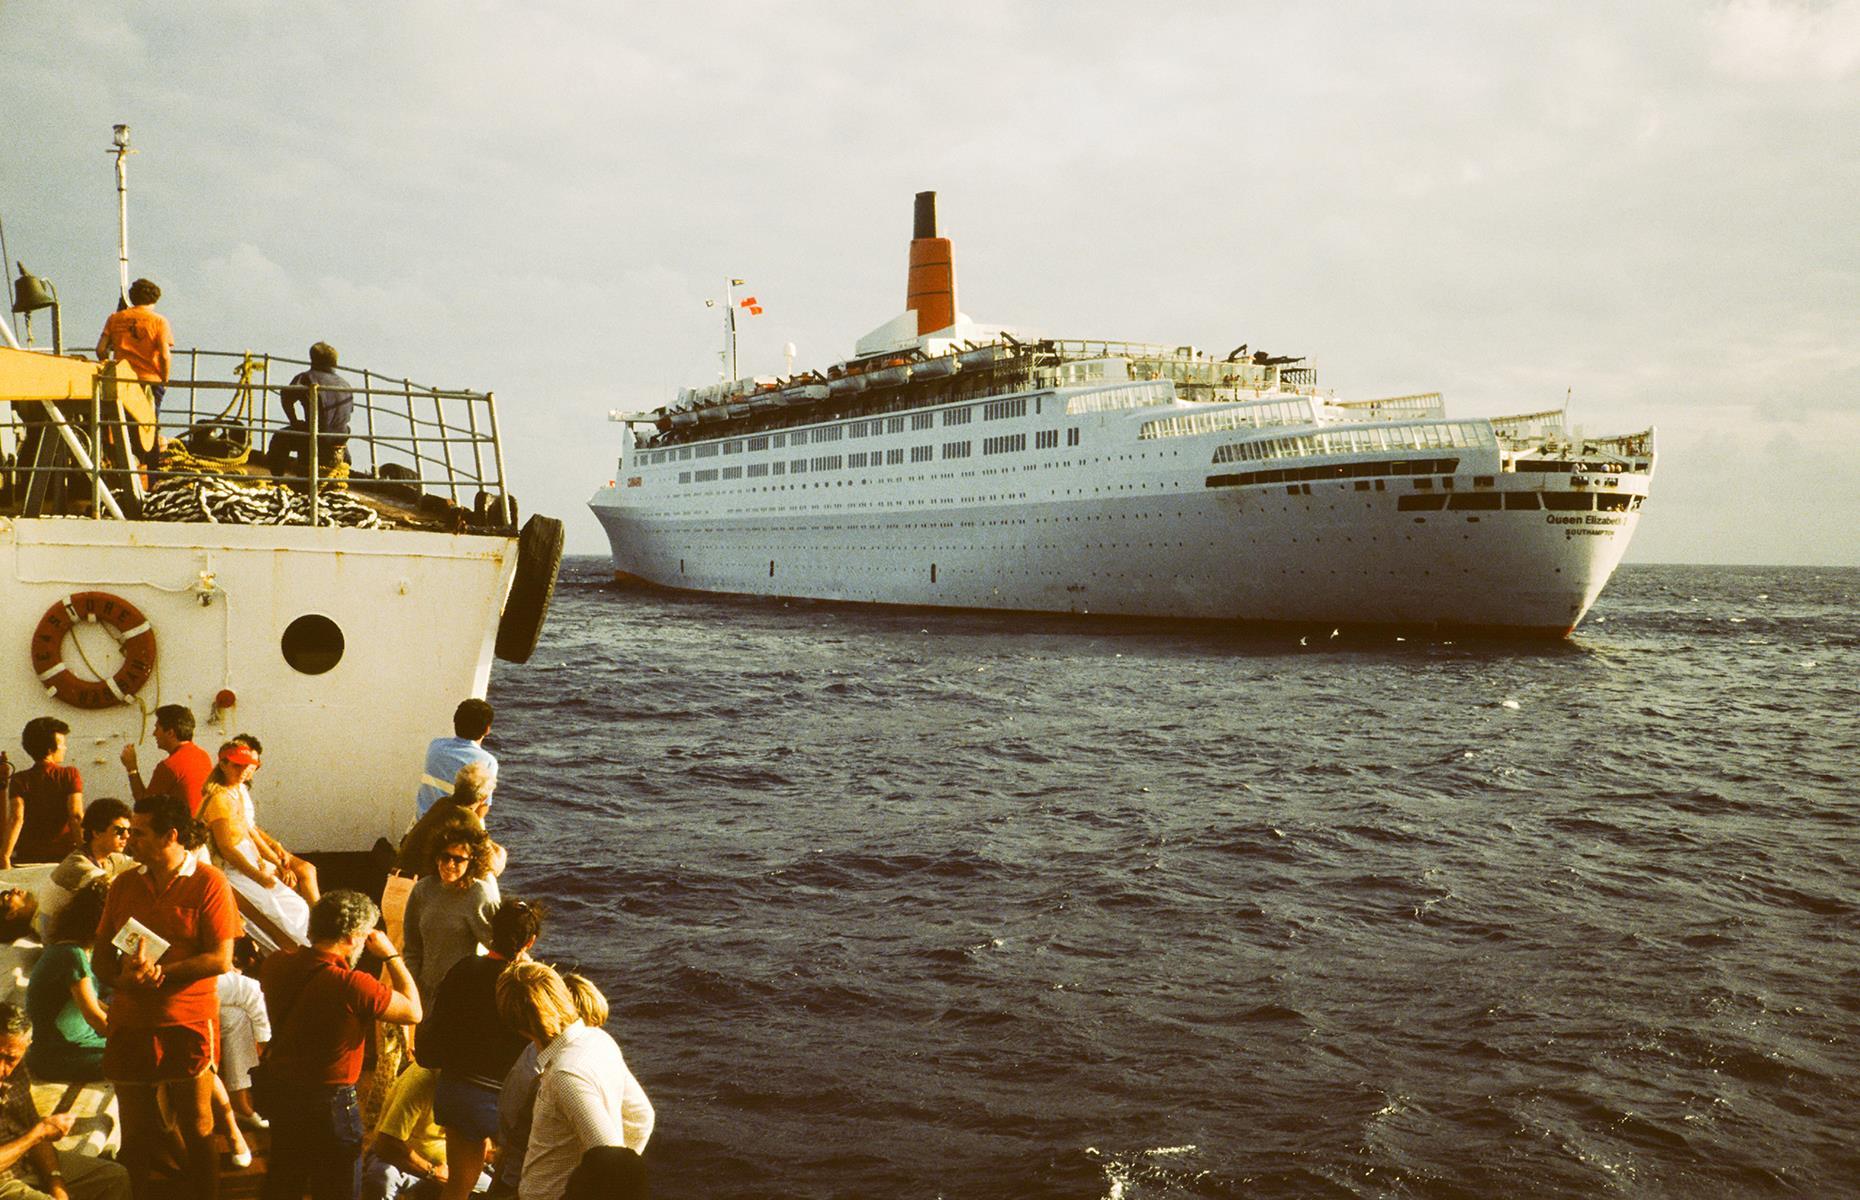 From the earliest trans-Atlantic voyages and golden age ships to today's glittering juggernauts, we reveal 32 nostalgic images that chronicle cruise history.